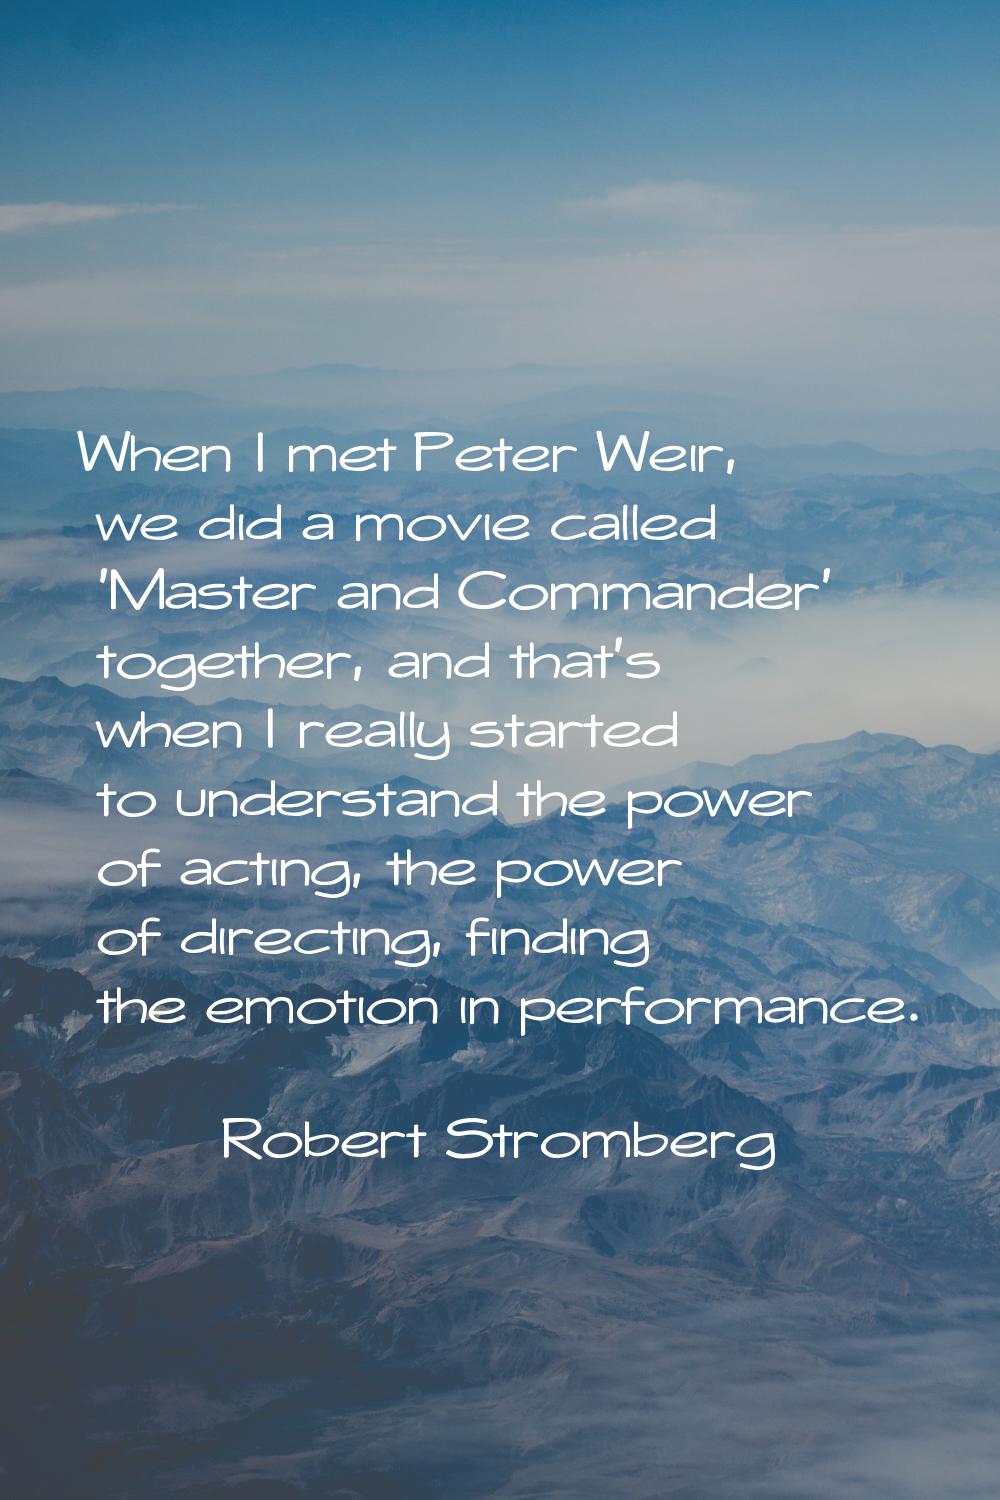 When I met Peter Weir, we did a movie called 'Master and Commander' together, and that's when I rea